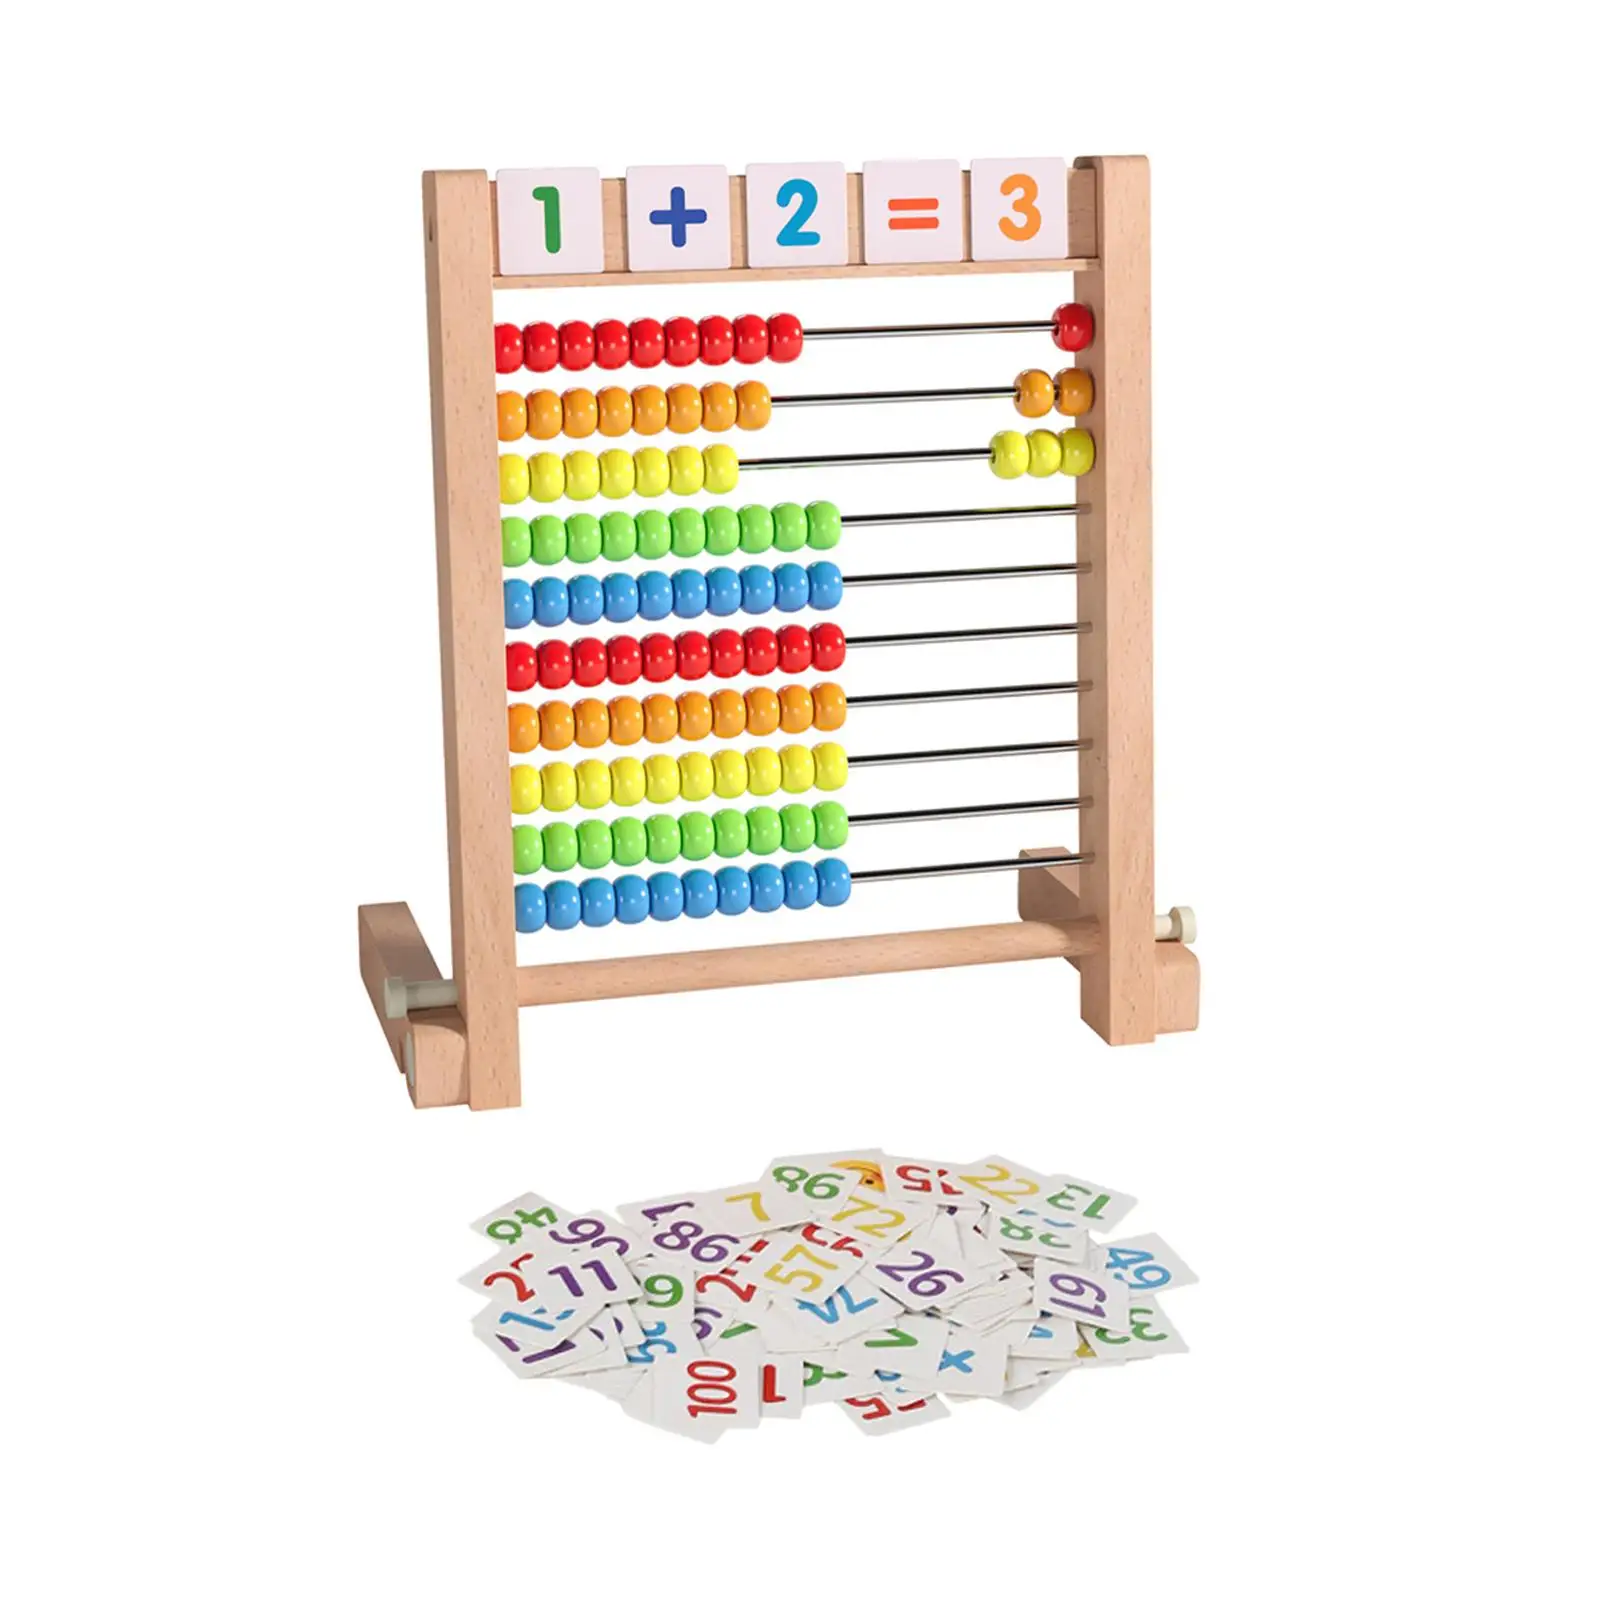 Wooden Abacus Ten Frame Set Smooth Edges Educational Counting Frames Toy for Elementary Toddlers Kids Children Boys Girls